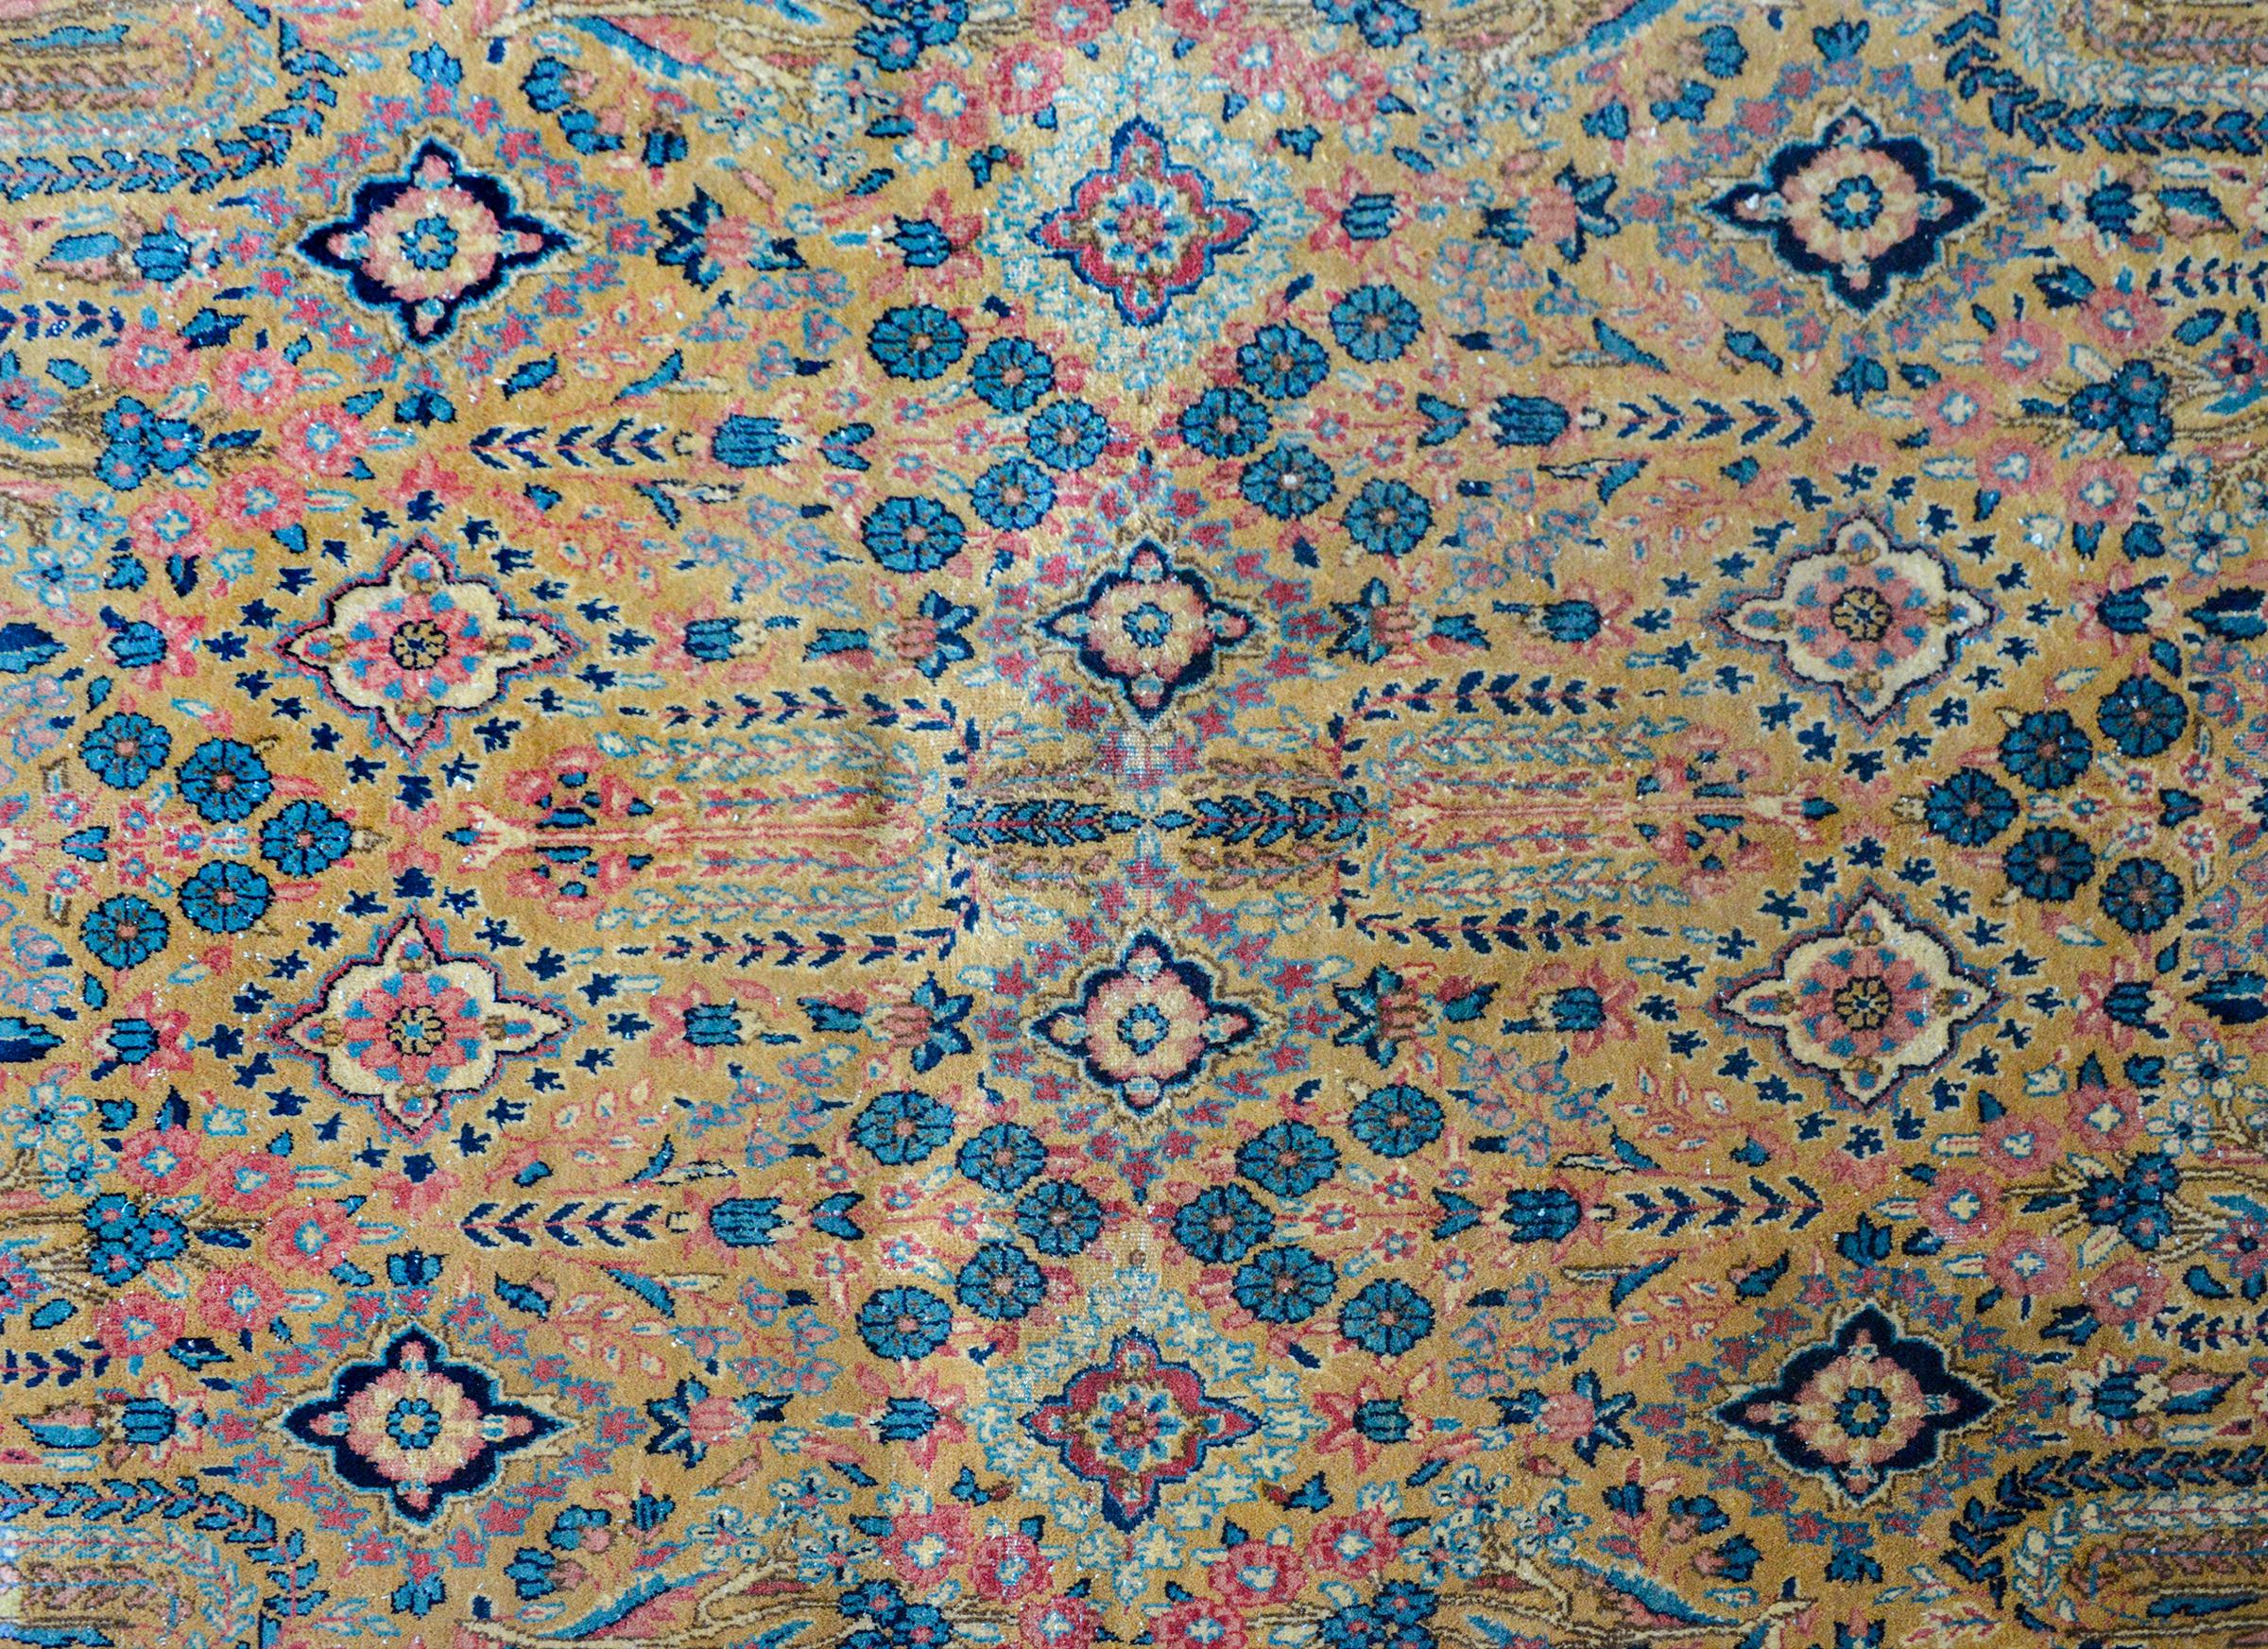 An early 20th century Persian Sarouk rug with a mirrored floral pattern containing myriad willow and cypress trees, flowers, and trees-of-life, all woven in rich golds, blues, pinks, and creams, and surrounded by a wide floral patterned border.